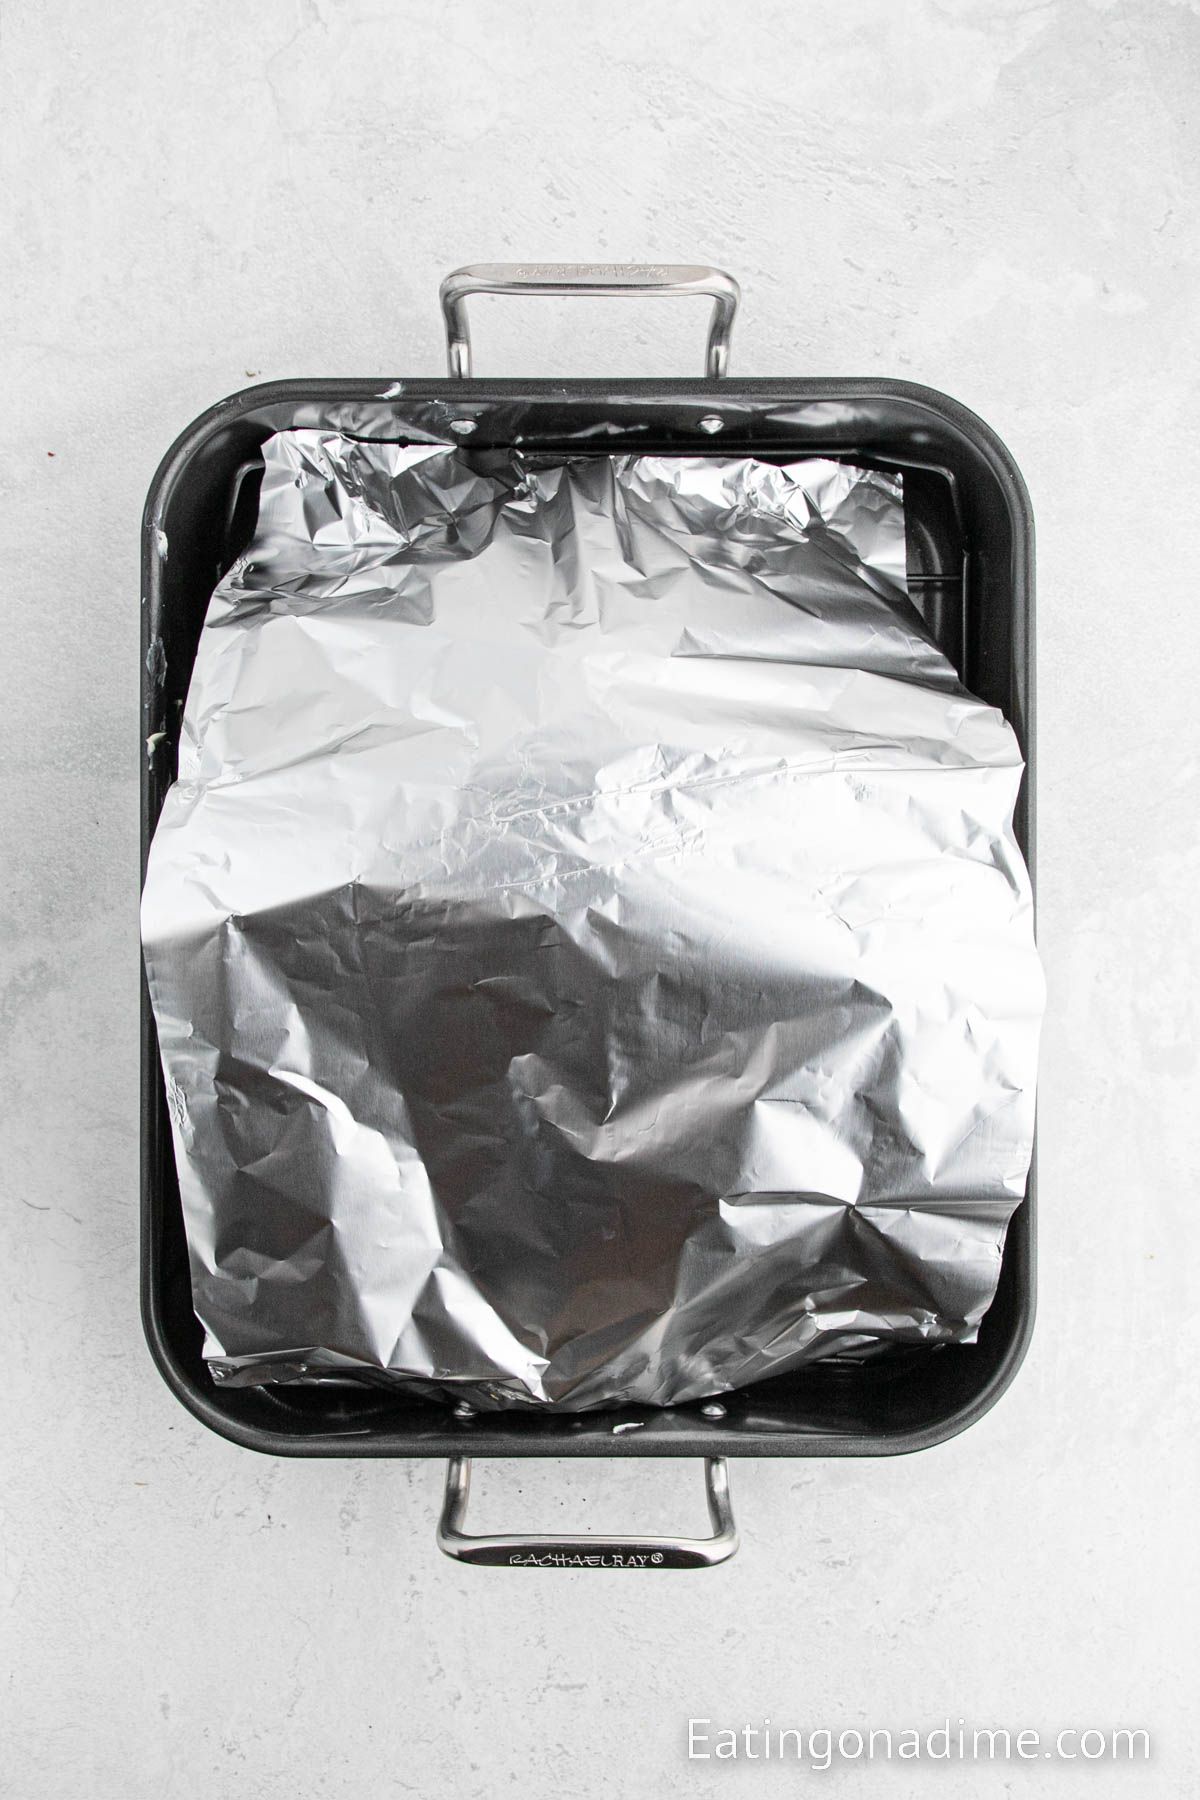 Covering the pan with foil in a roasting pan